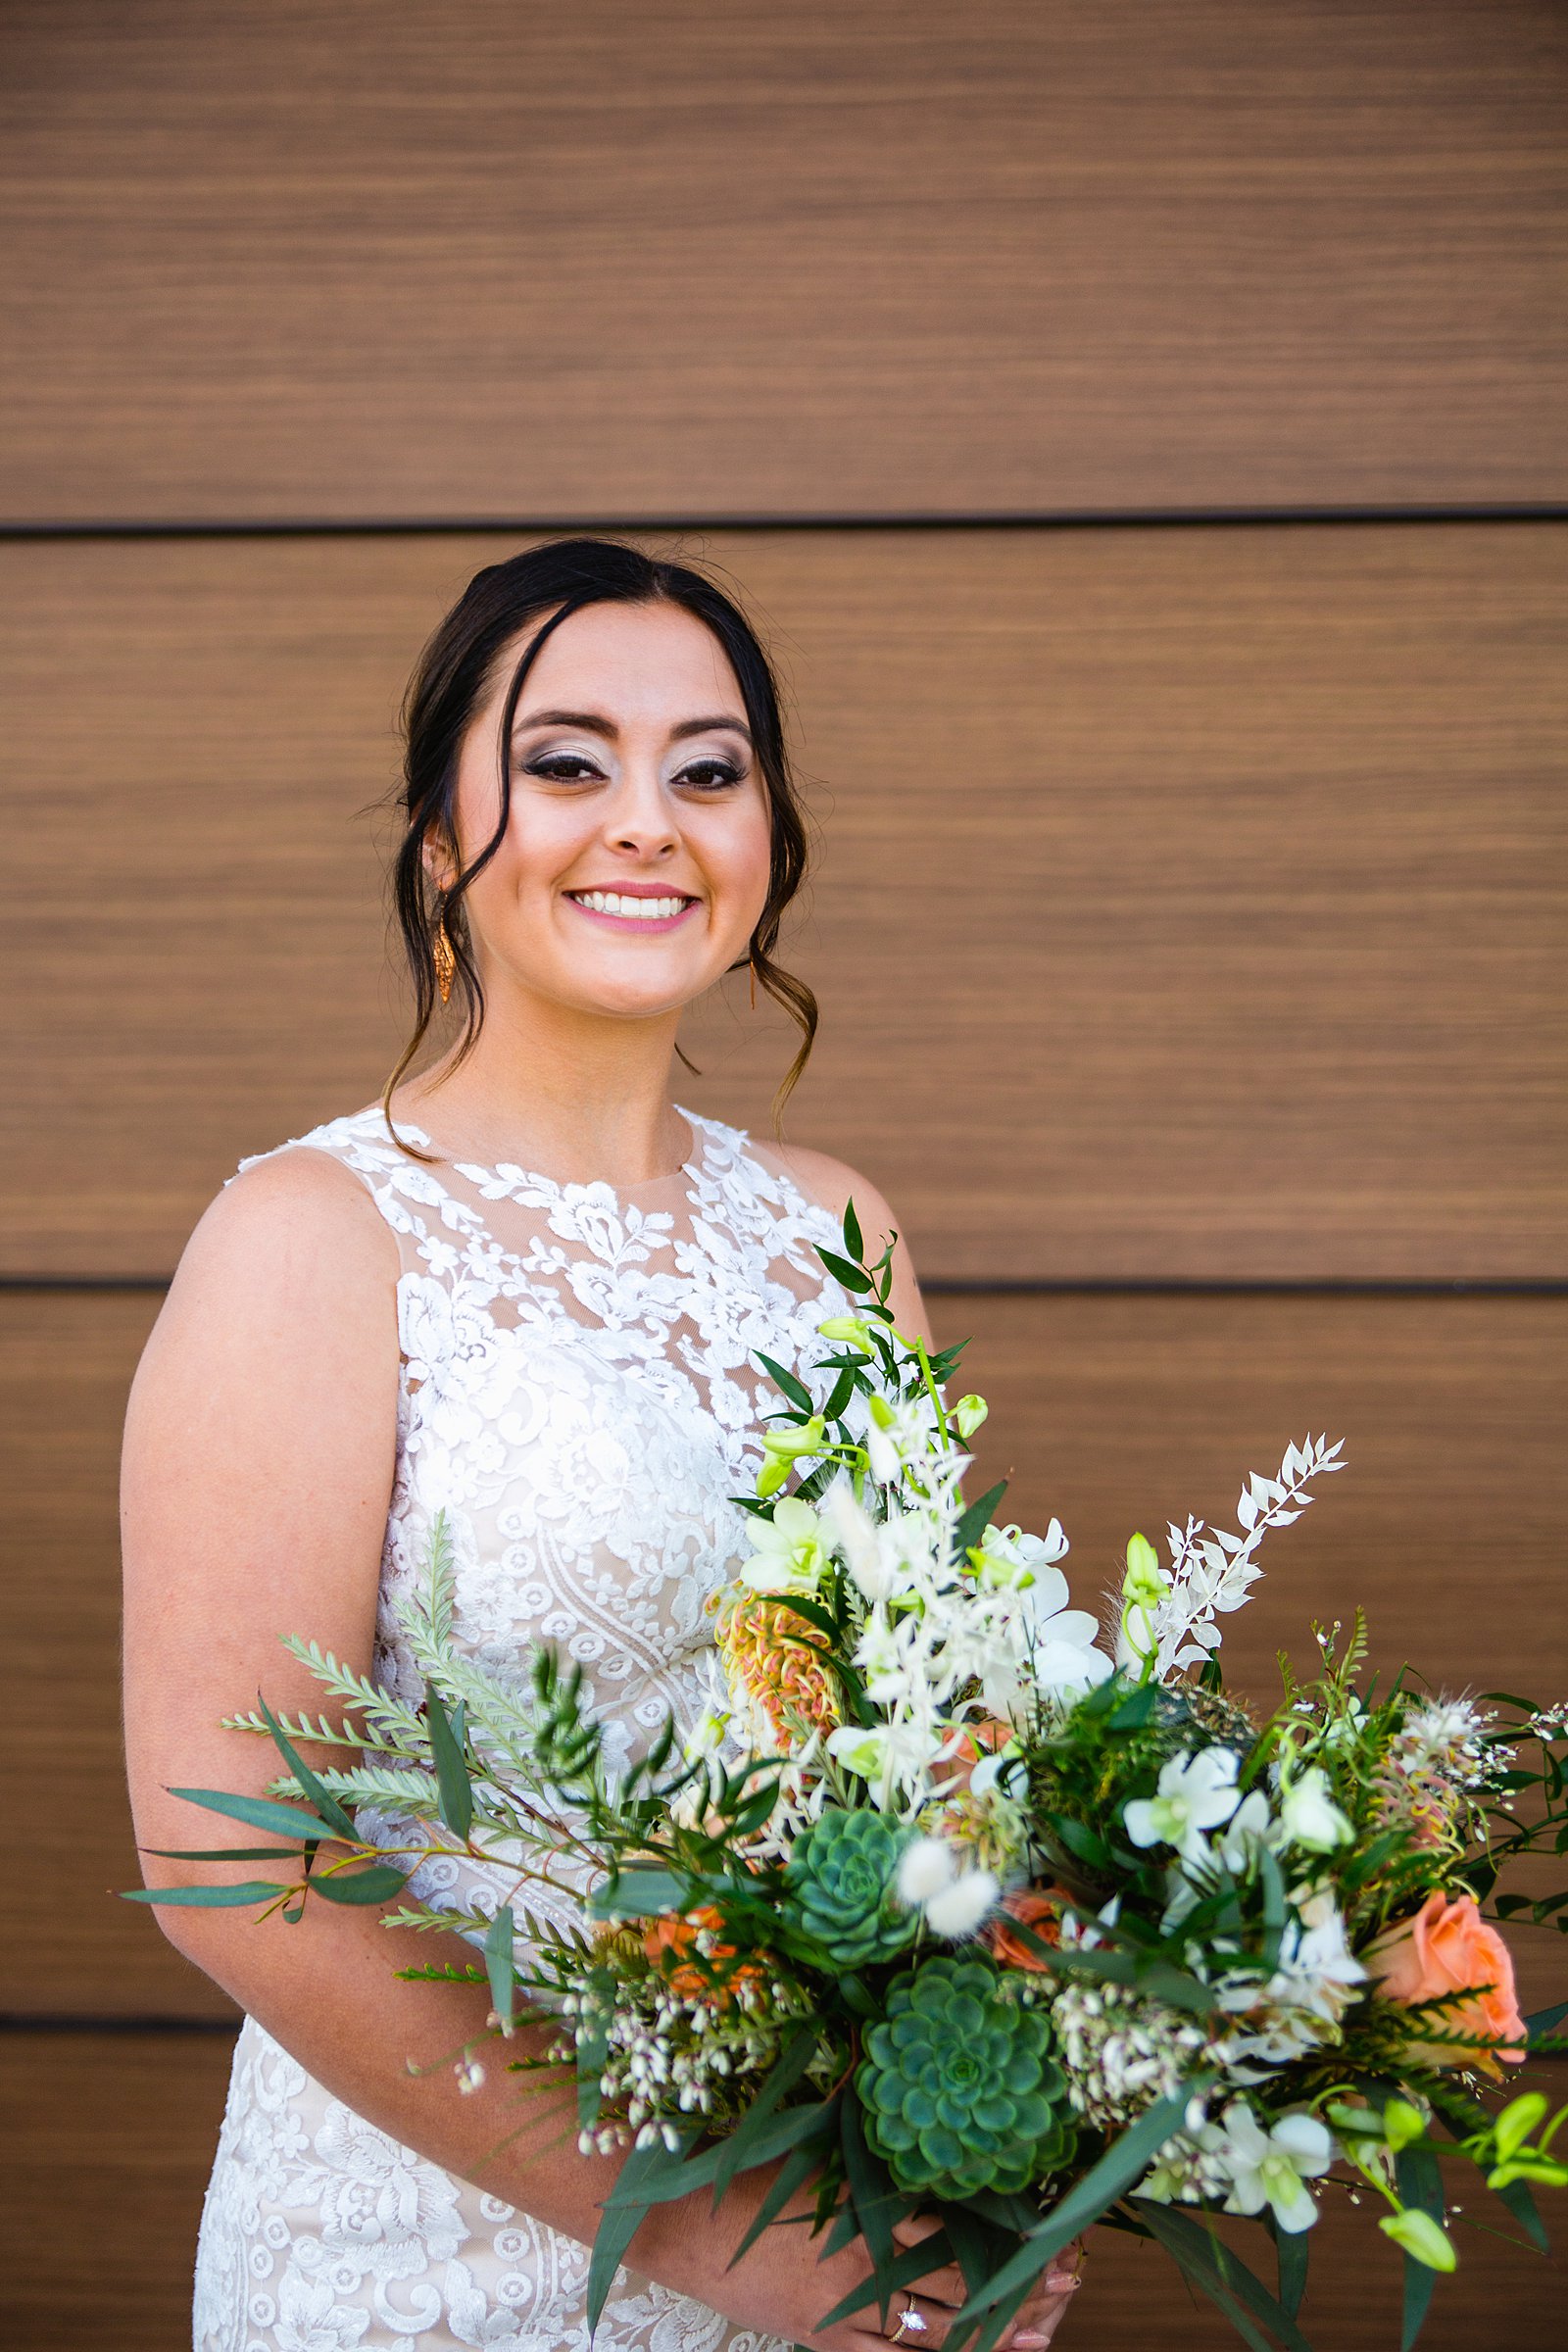 Bride with a romantic cream and white wedding dress and a large, wild desert inspired bouquet by Phoenix wedding photographers PMA Photography.